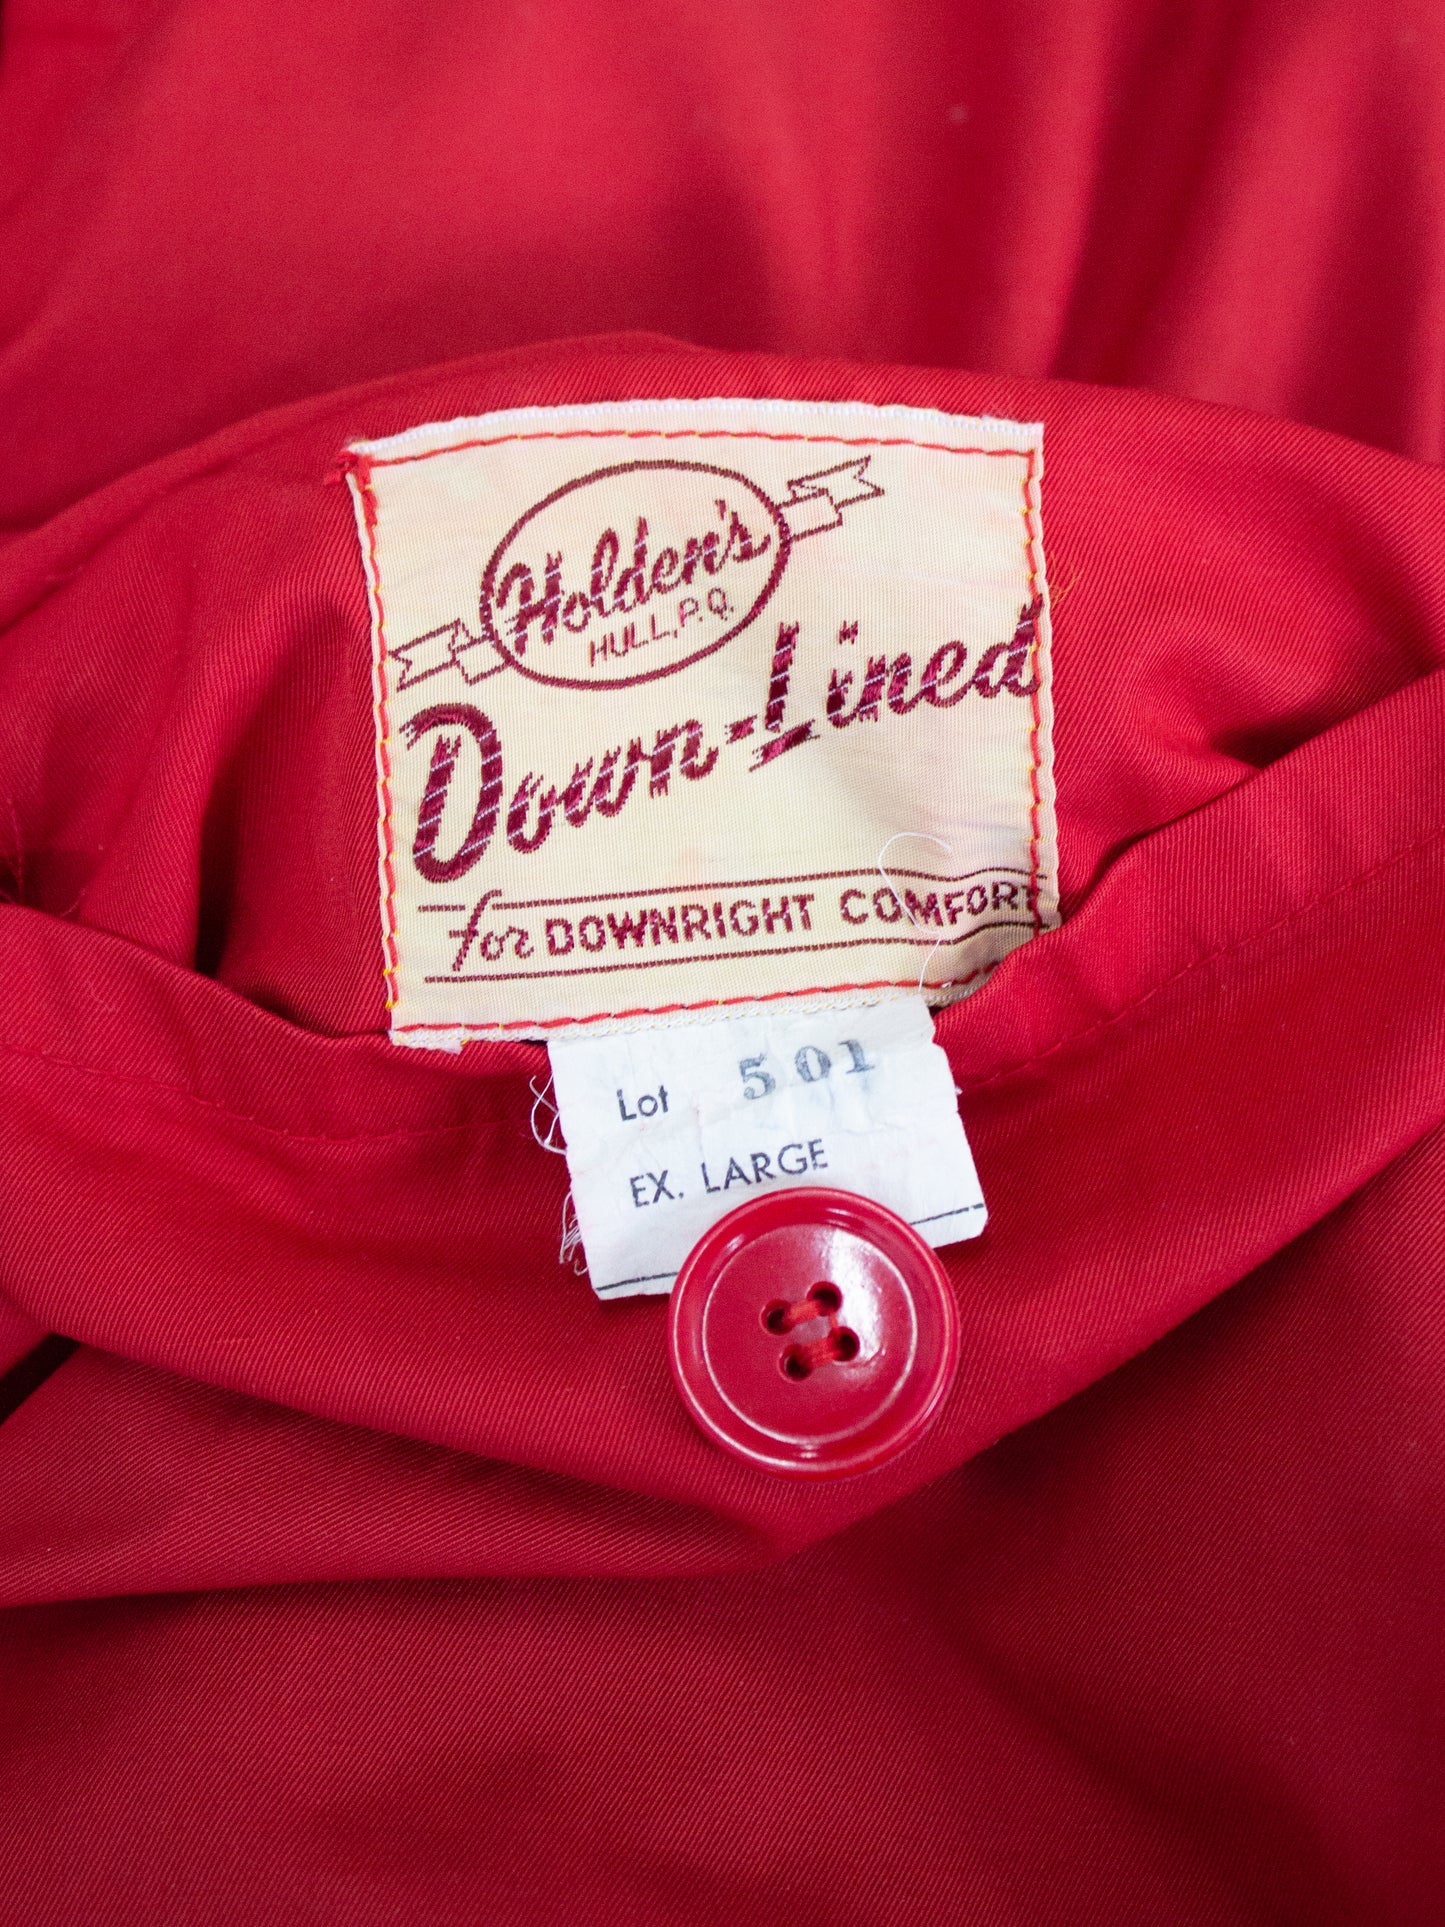 1950's Holden's Down Lined Reversible Jacket Made in Canada (X Large)